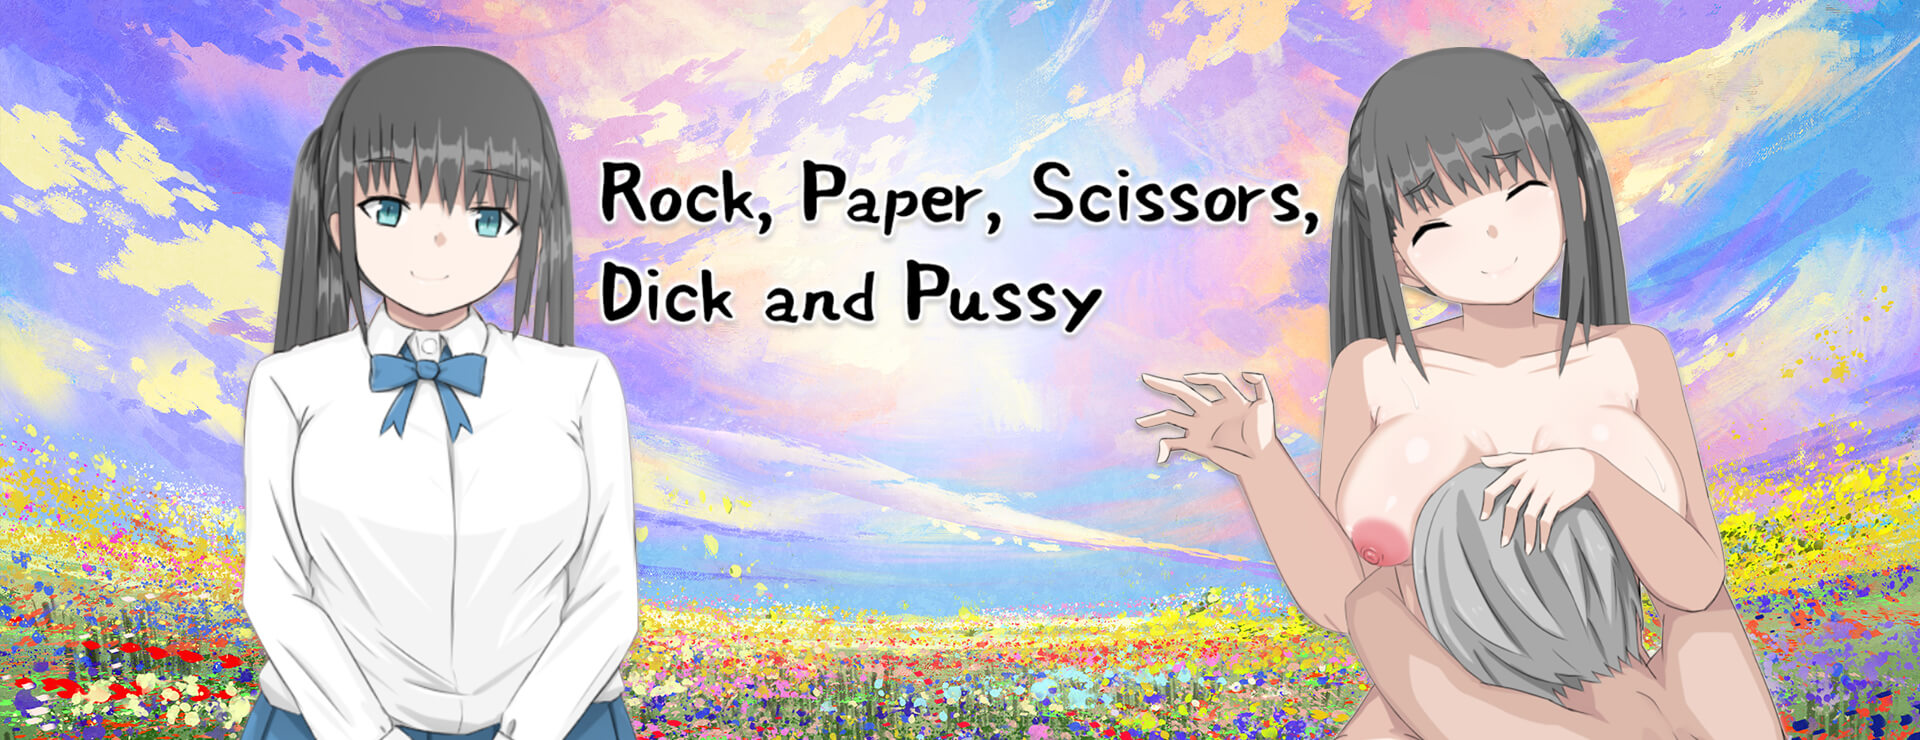 Rock, Paper, Scissors, Dick and Pussy - Casual Game